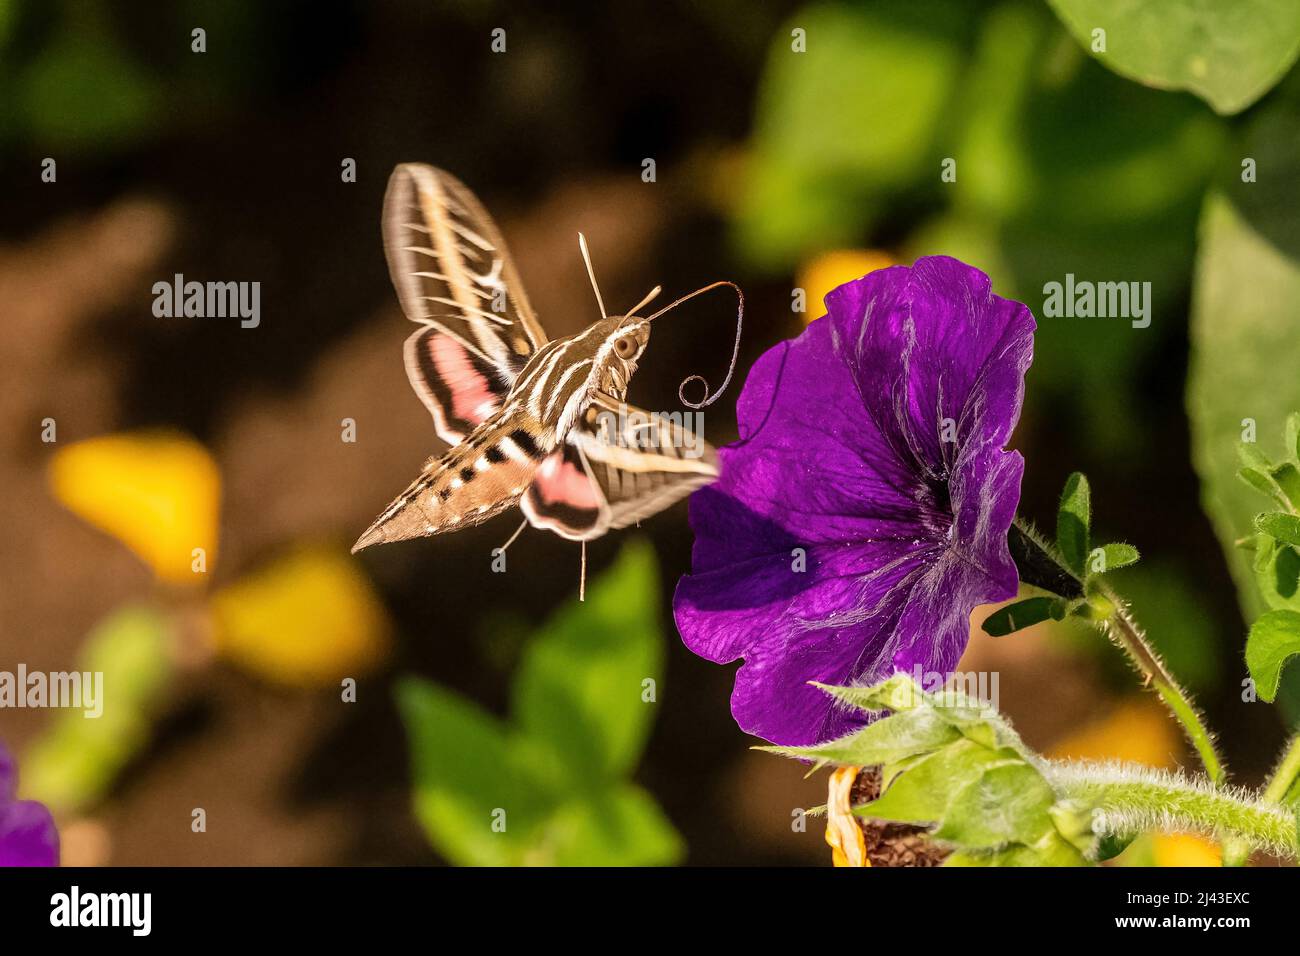 Closeup image of a White-Lined Sphinx Moth with its long tongue visible, while hovering in mid-air by a purple petunia. Stock Photo